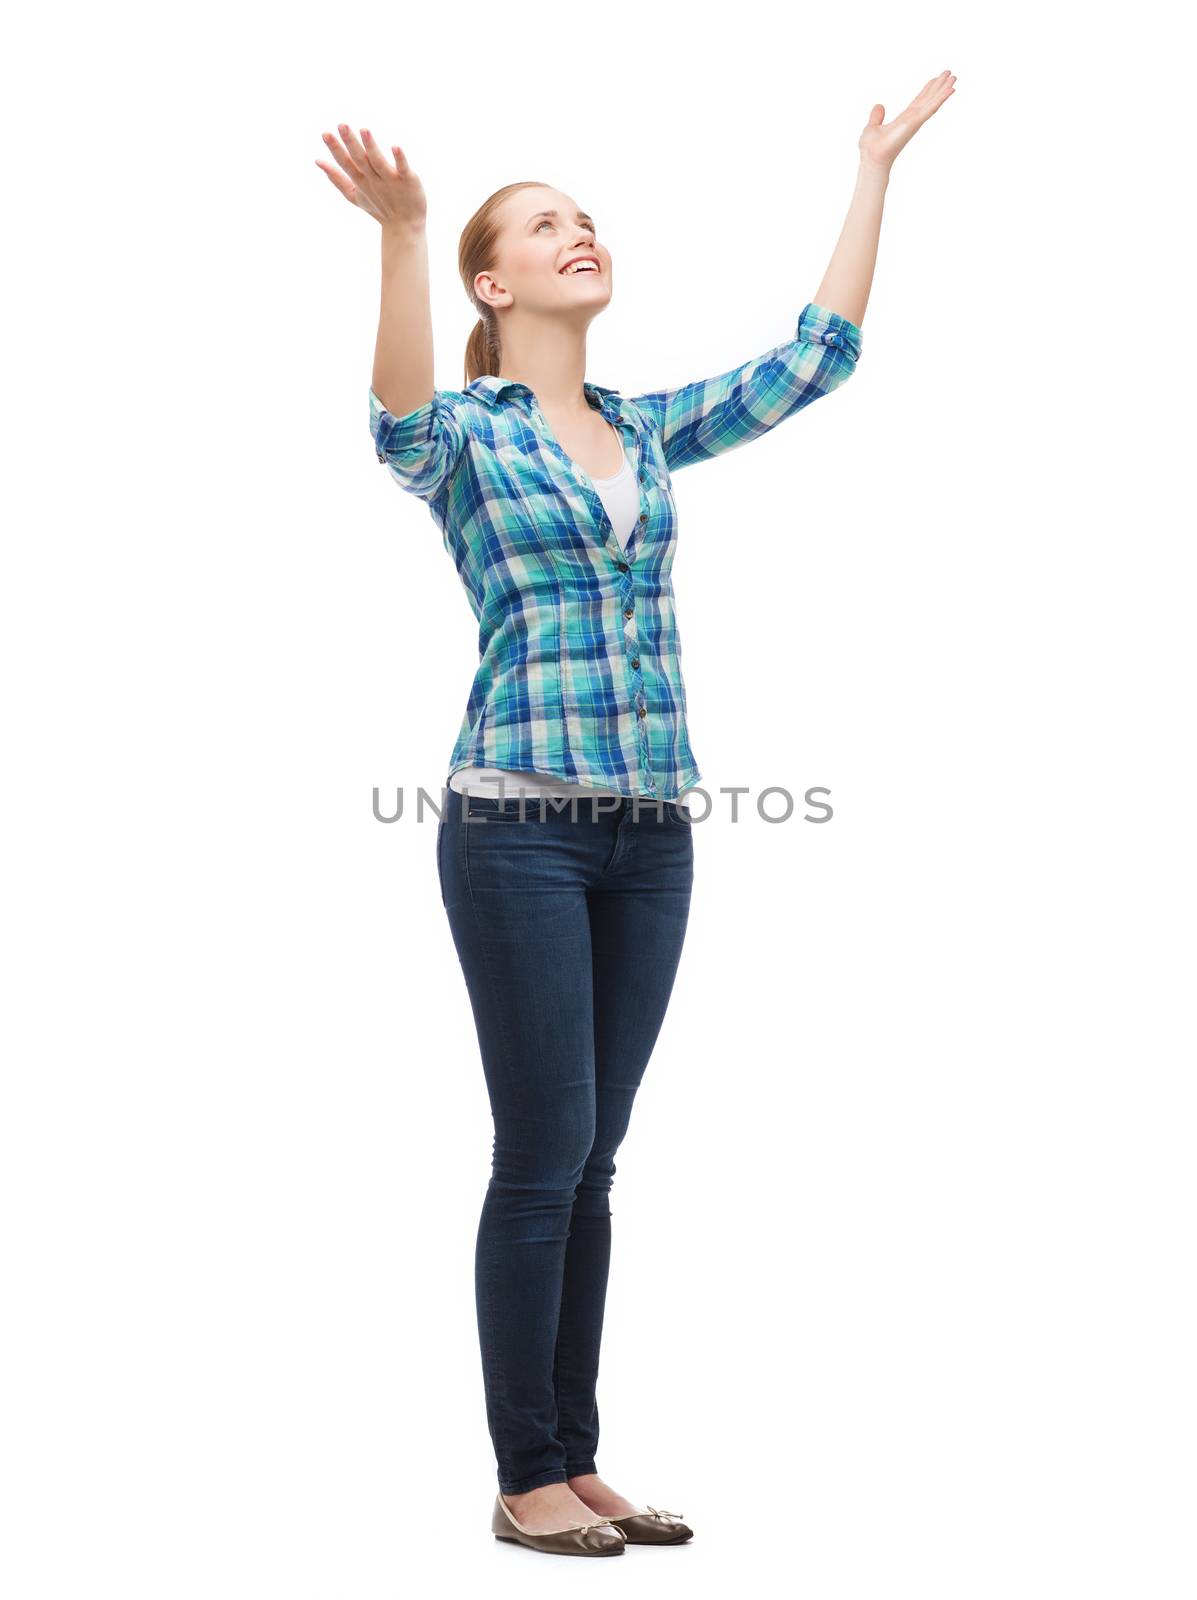 smiling young woman waving hands by dolgachov